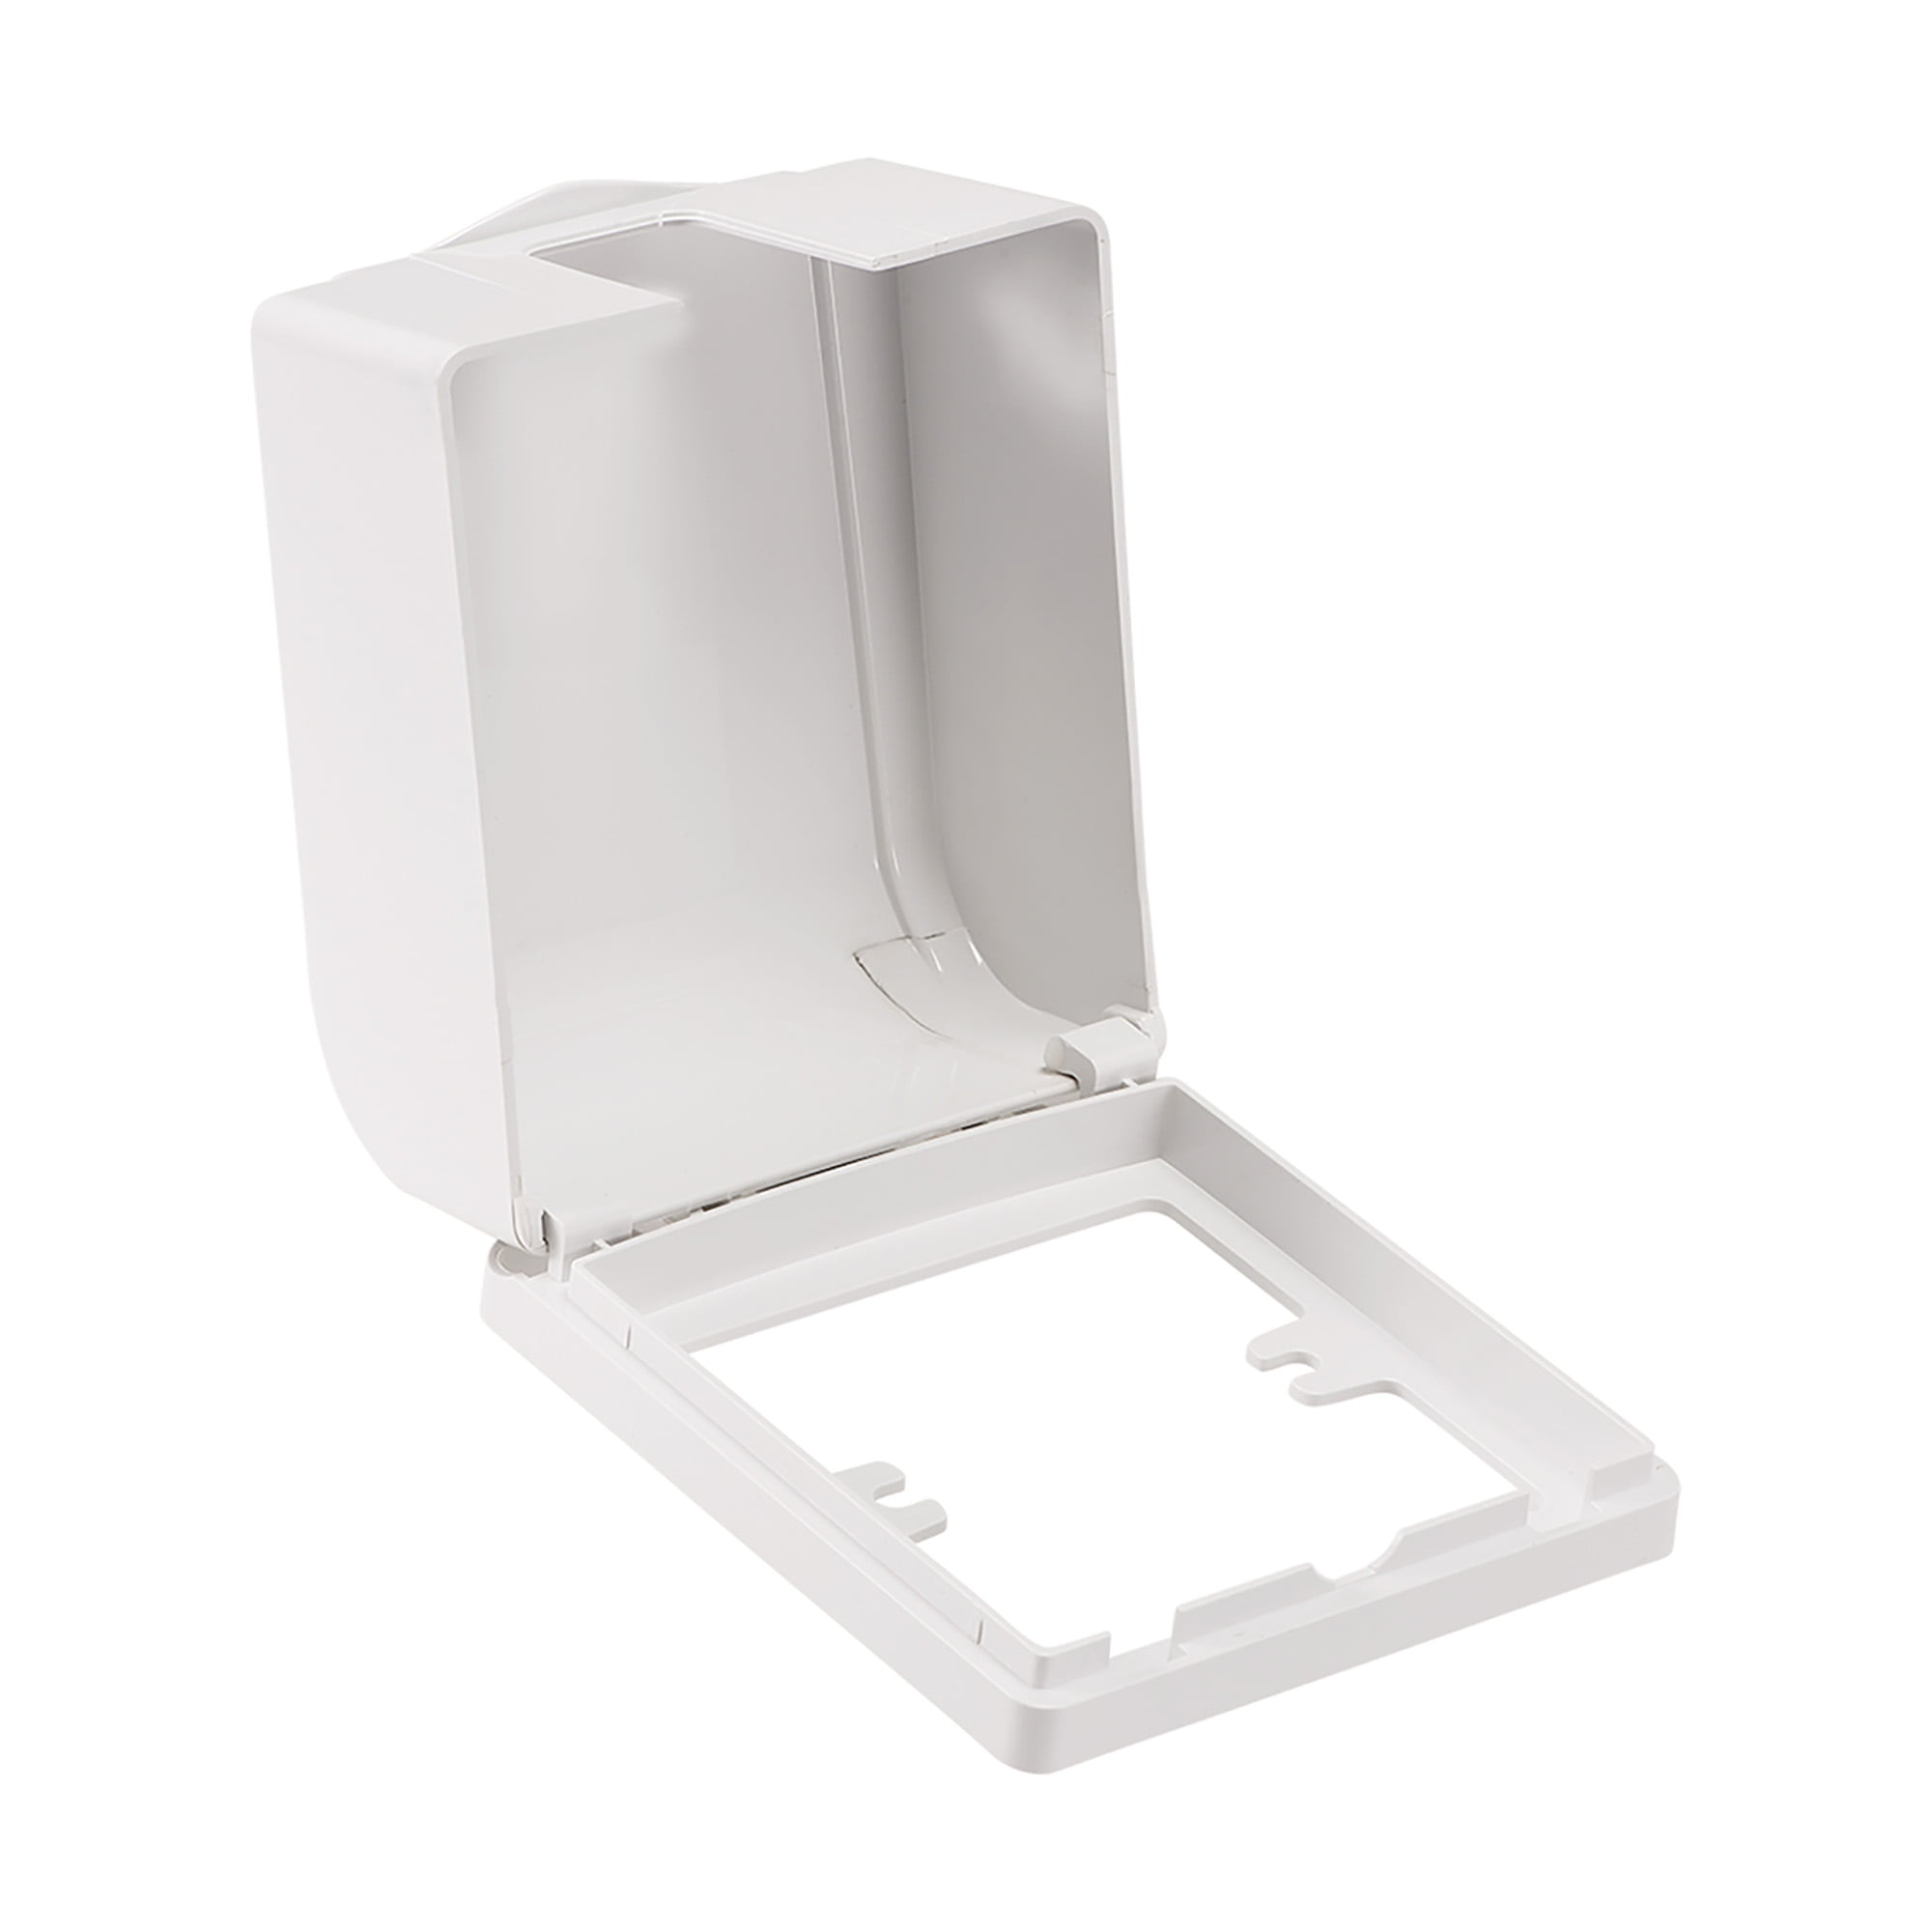 Greenfield CDRVWS Series Weatherproof Electrical Outlet Box Cover White